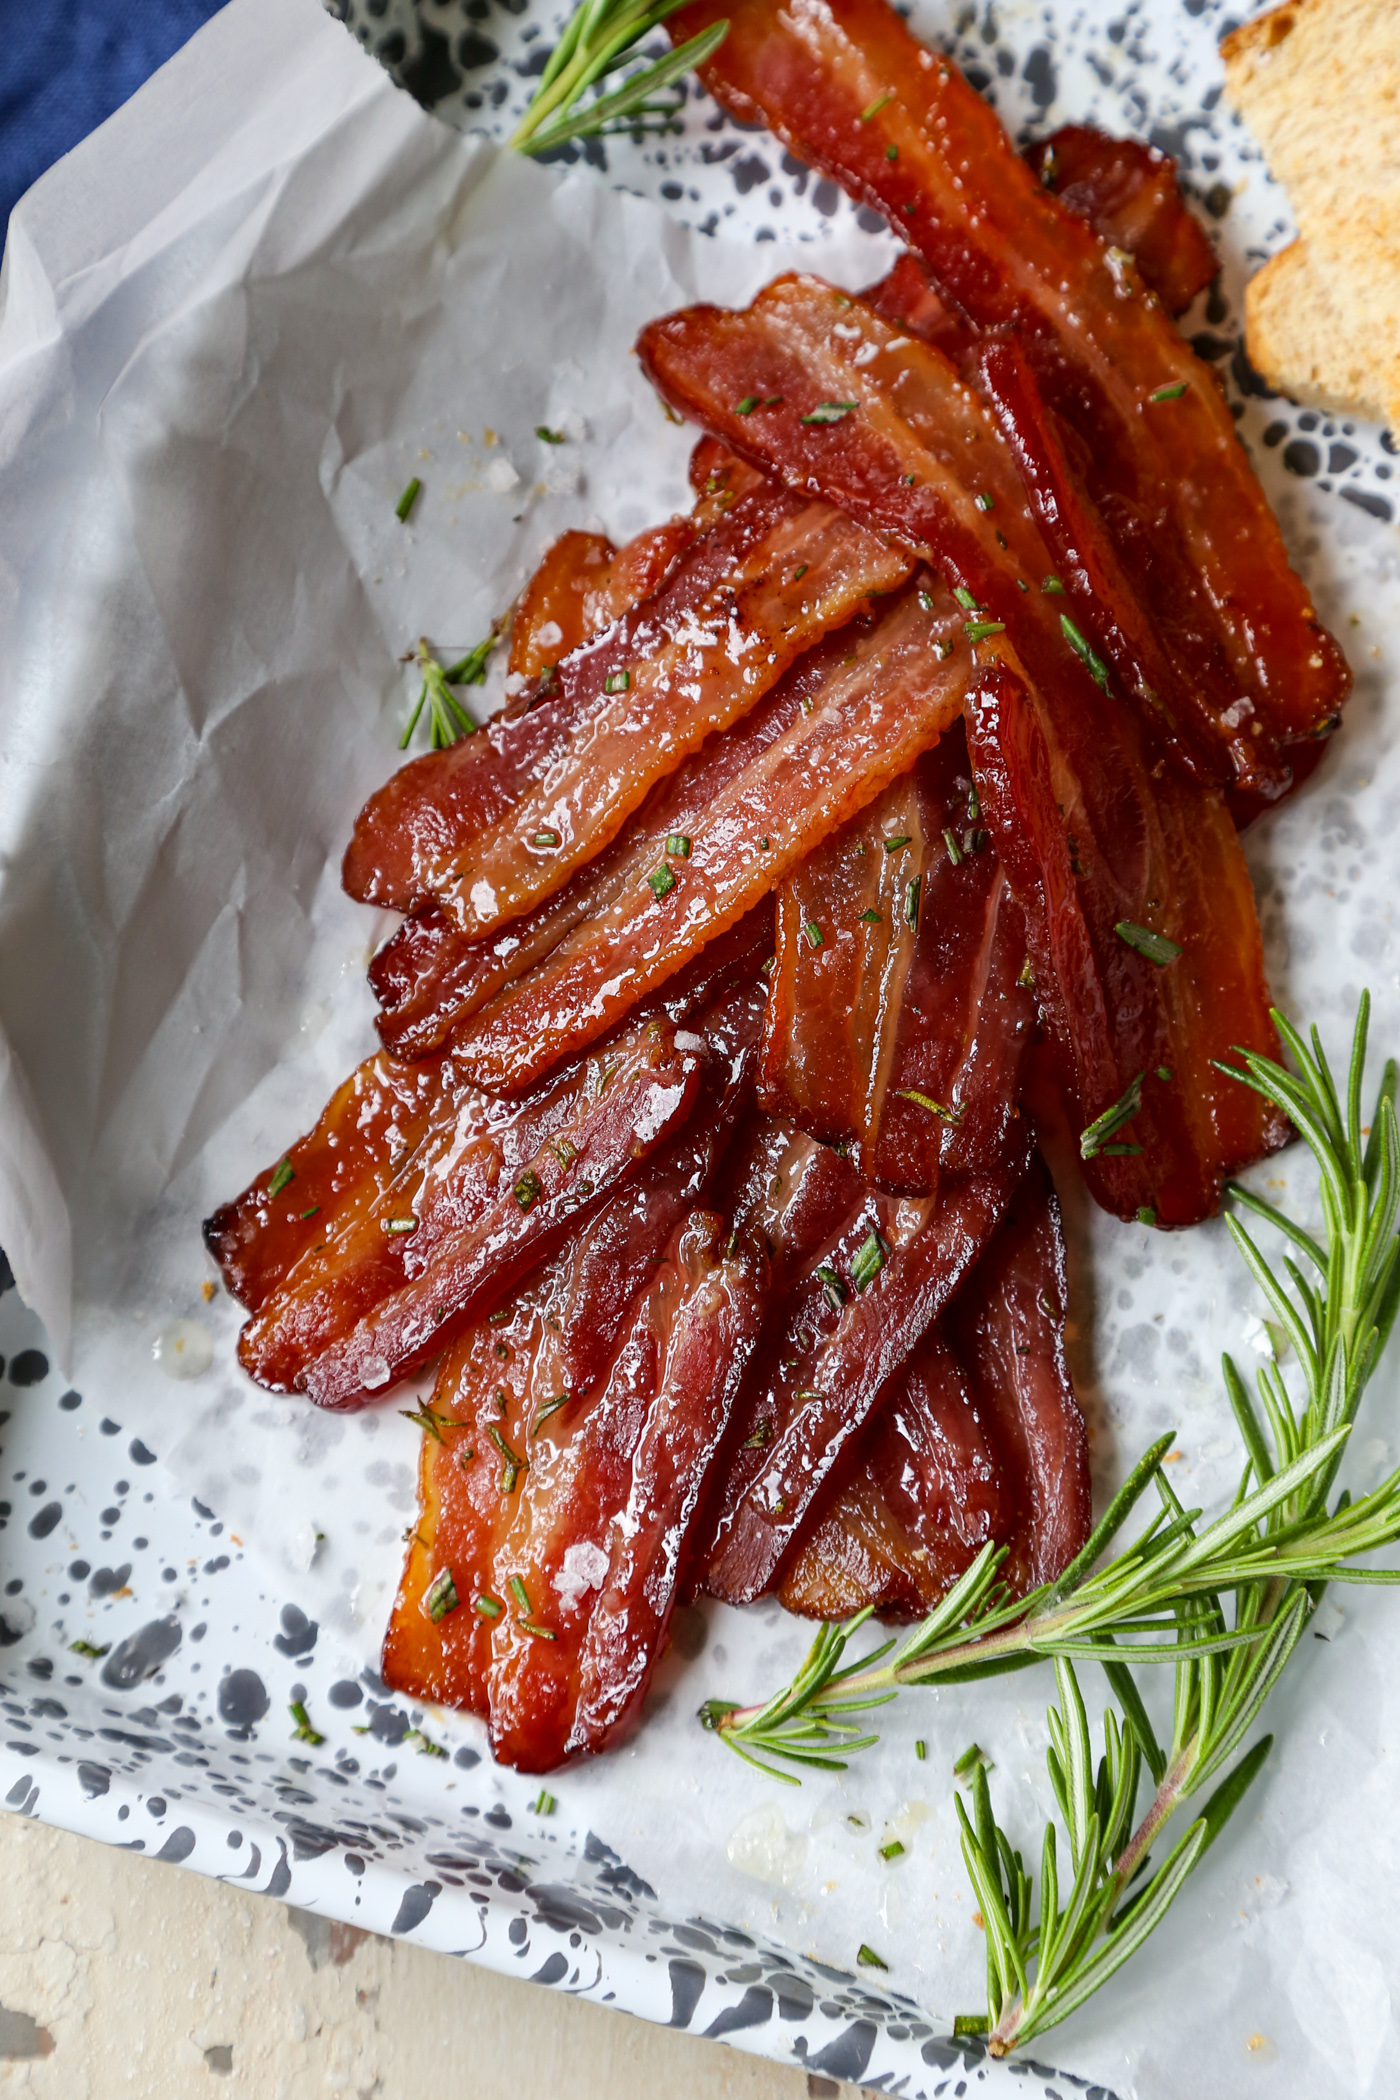 Maple rosemary bacon cooked in the oven on a parchment lined baking sheet with rosemary sprigs and toast